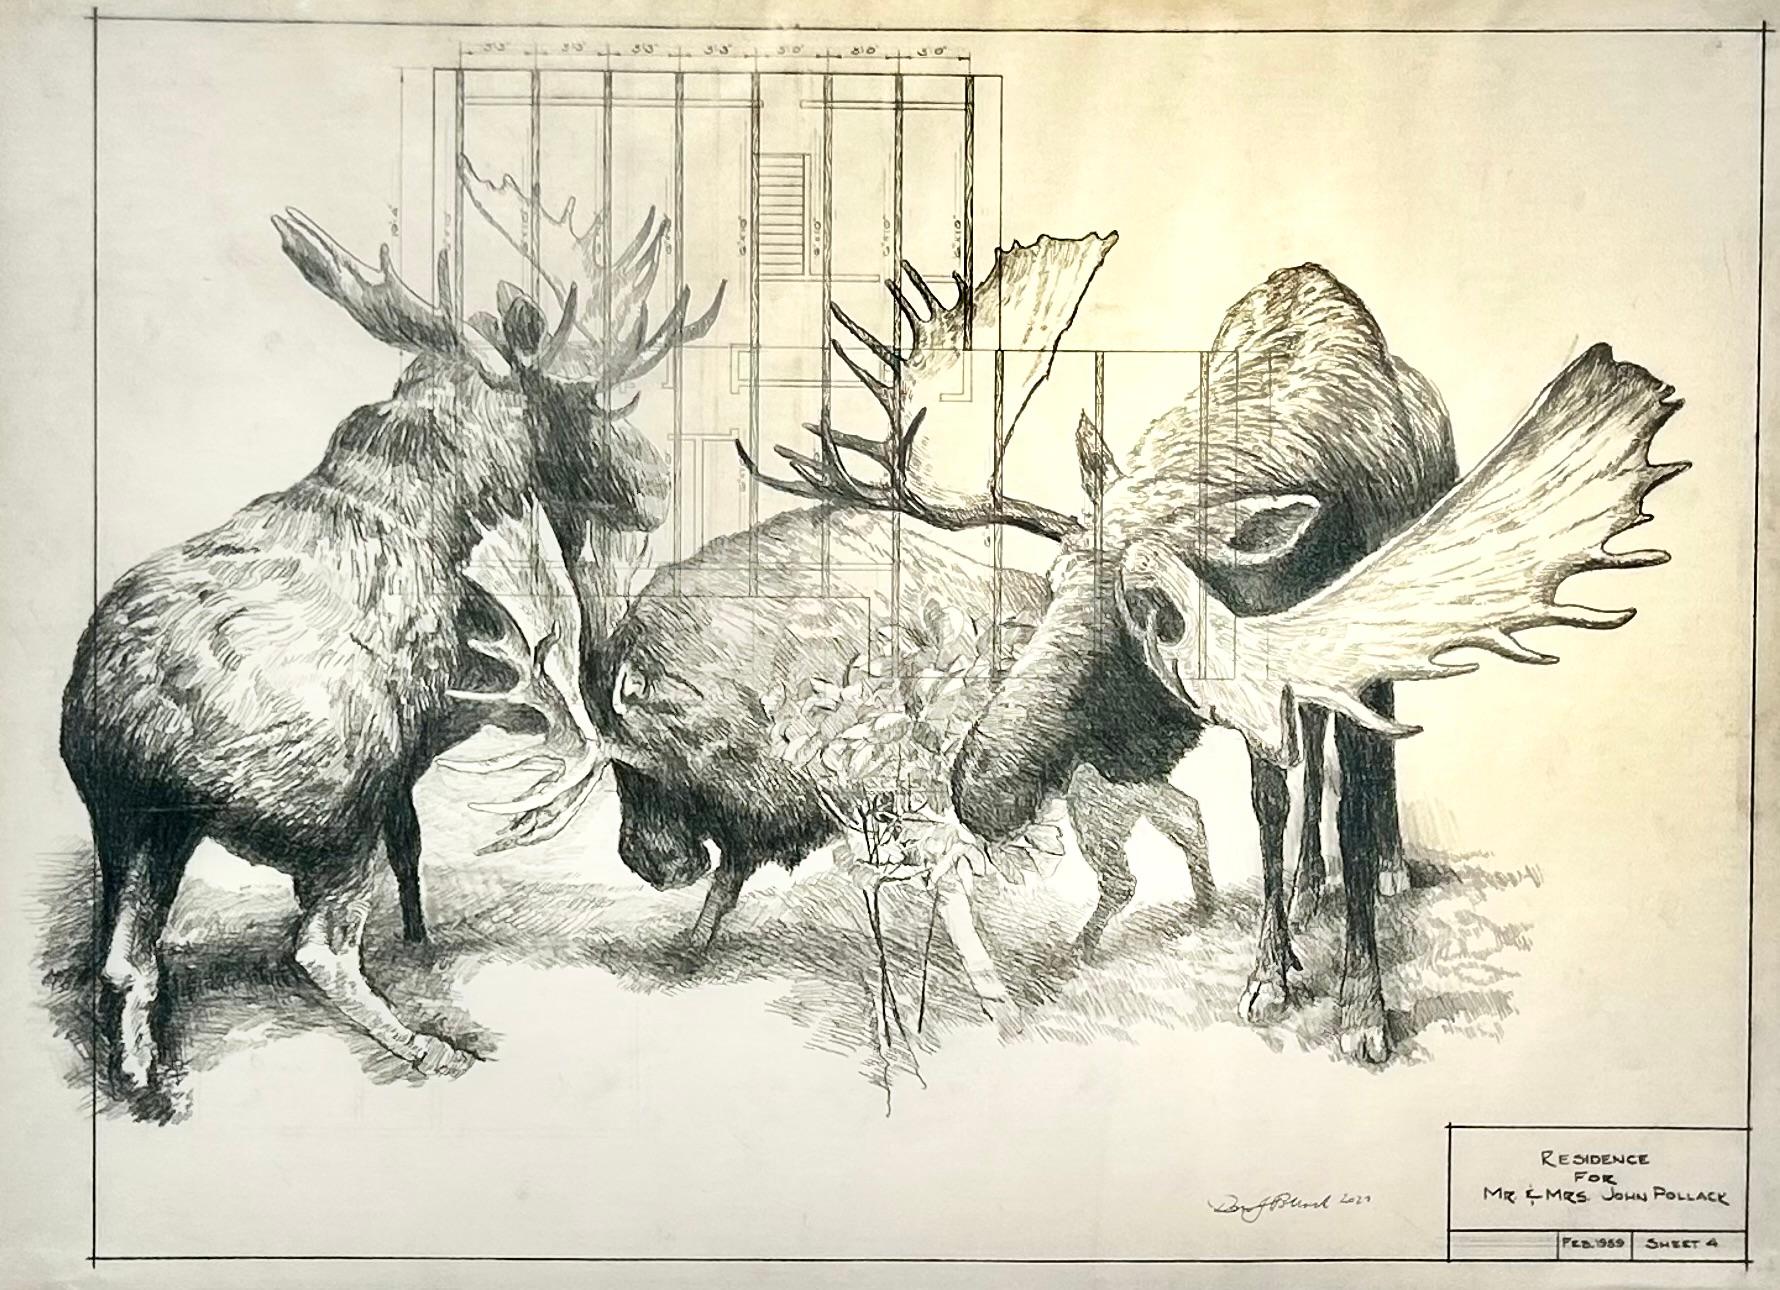 Don Pollack Landscape Art - Jobsite - Moose in Graphite on Antique Architectural Drawings 